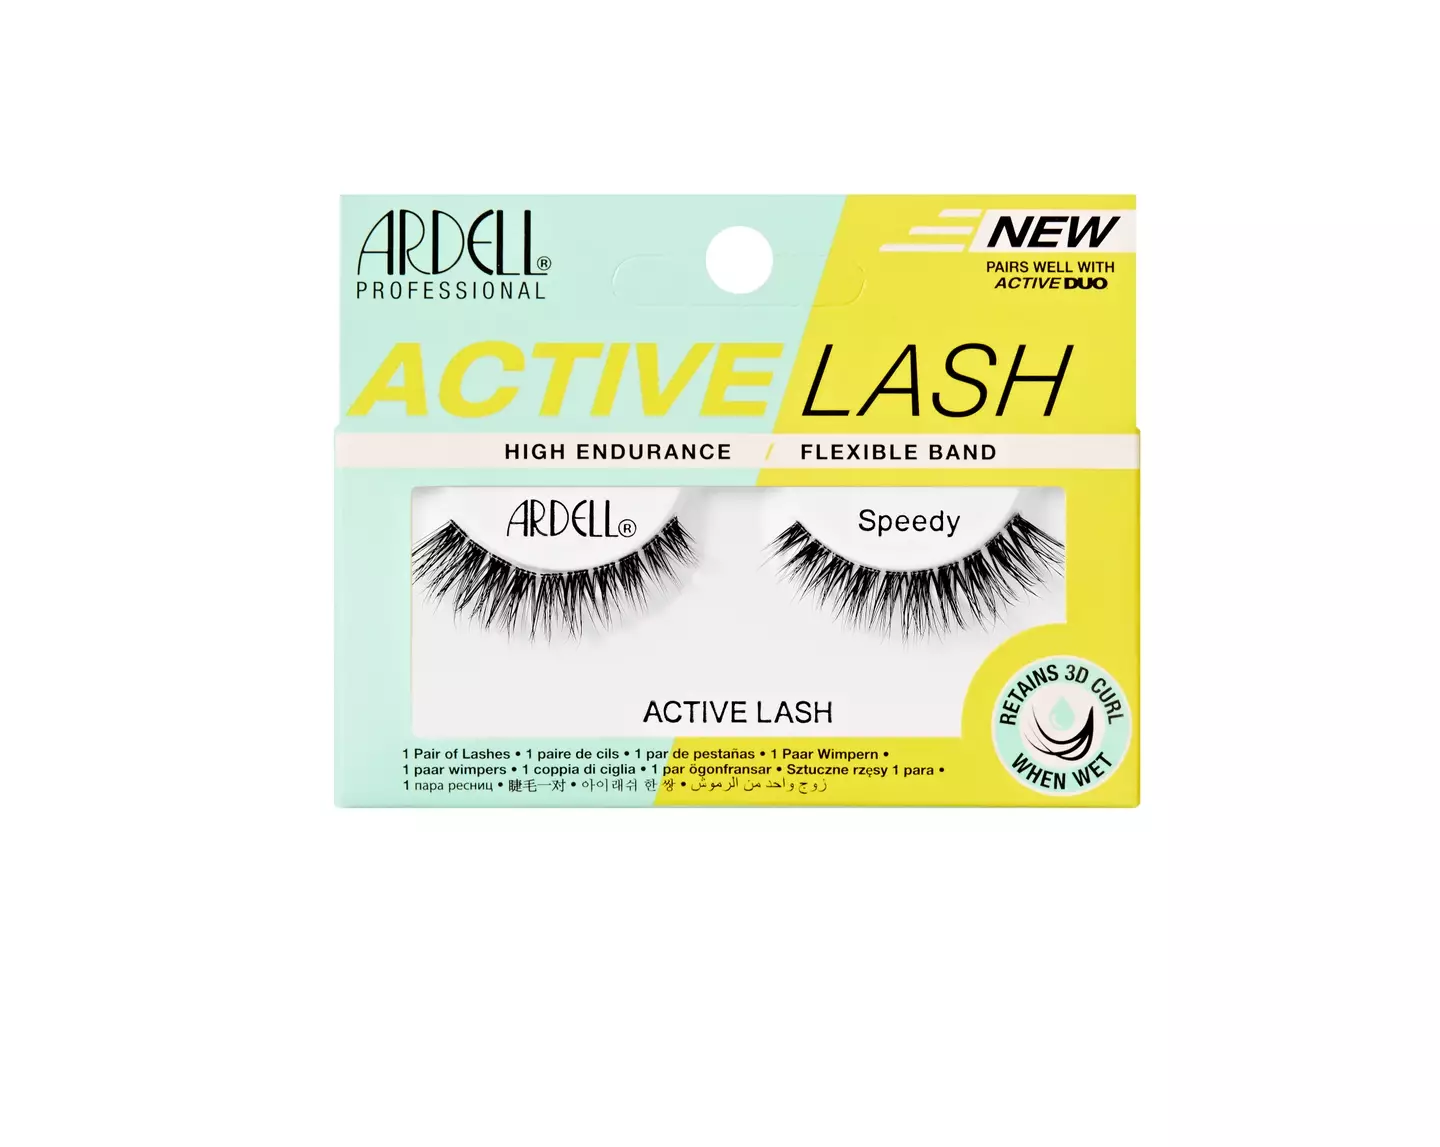 ARDELL Lashes have come out with a set of active lashes, designed to withstand any workouts.